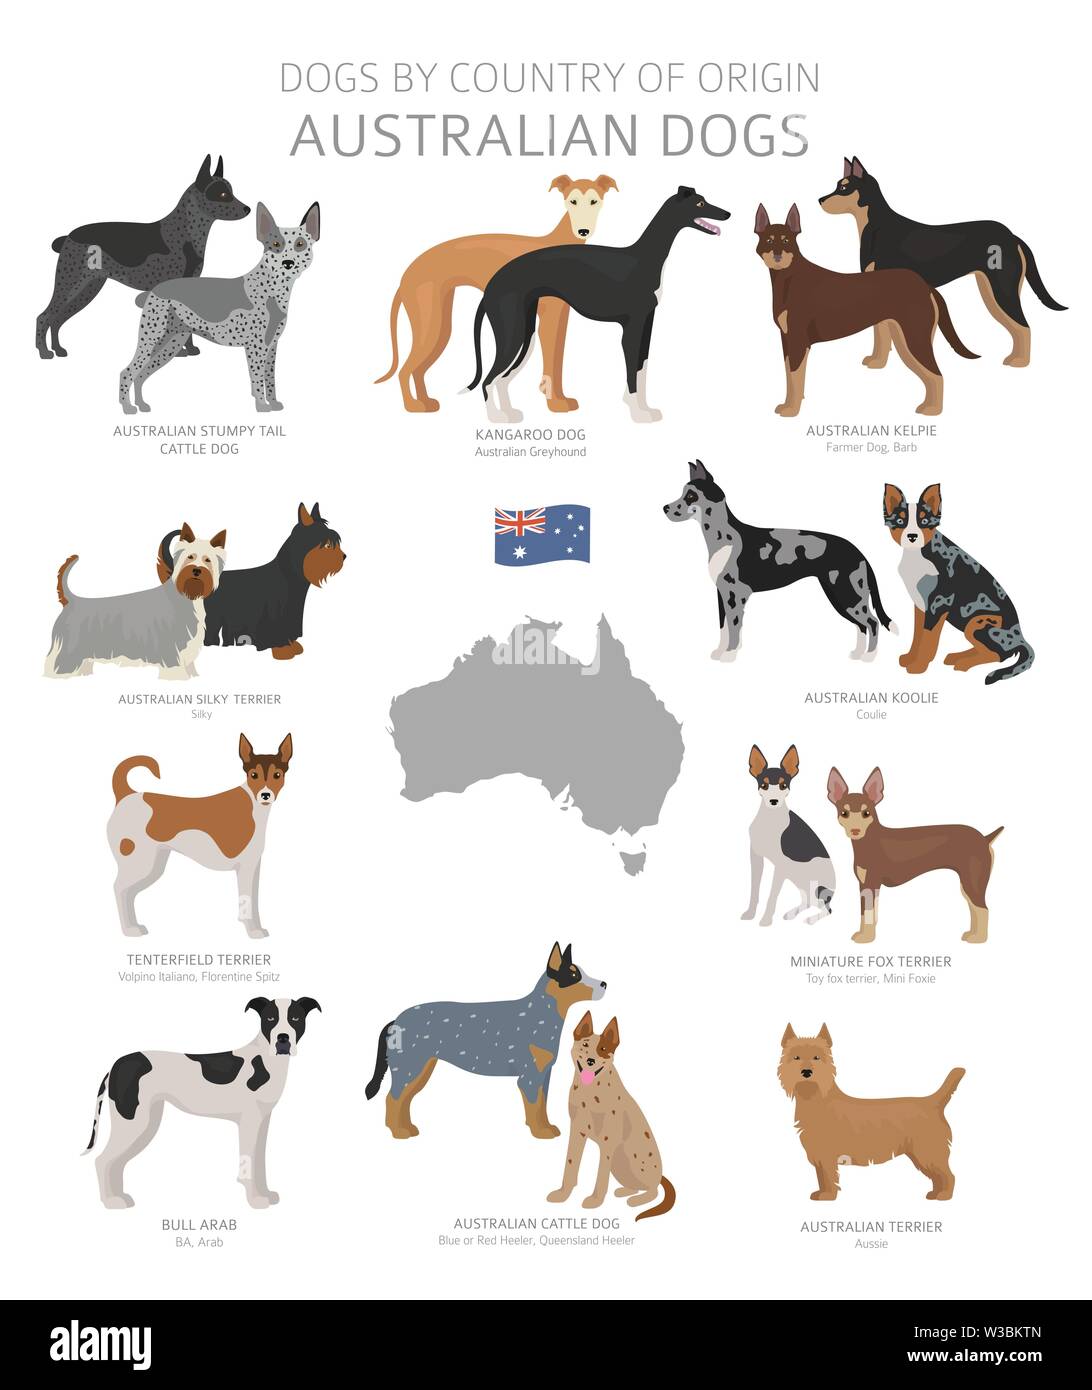 Dogs by country of origin. Australian dog breeds. Shepherds, hunting, herding, toy, working and service dogs  set.  Vector illustration Stock Vector